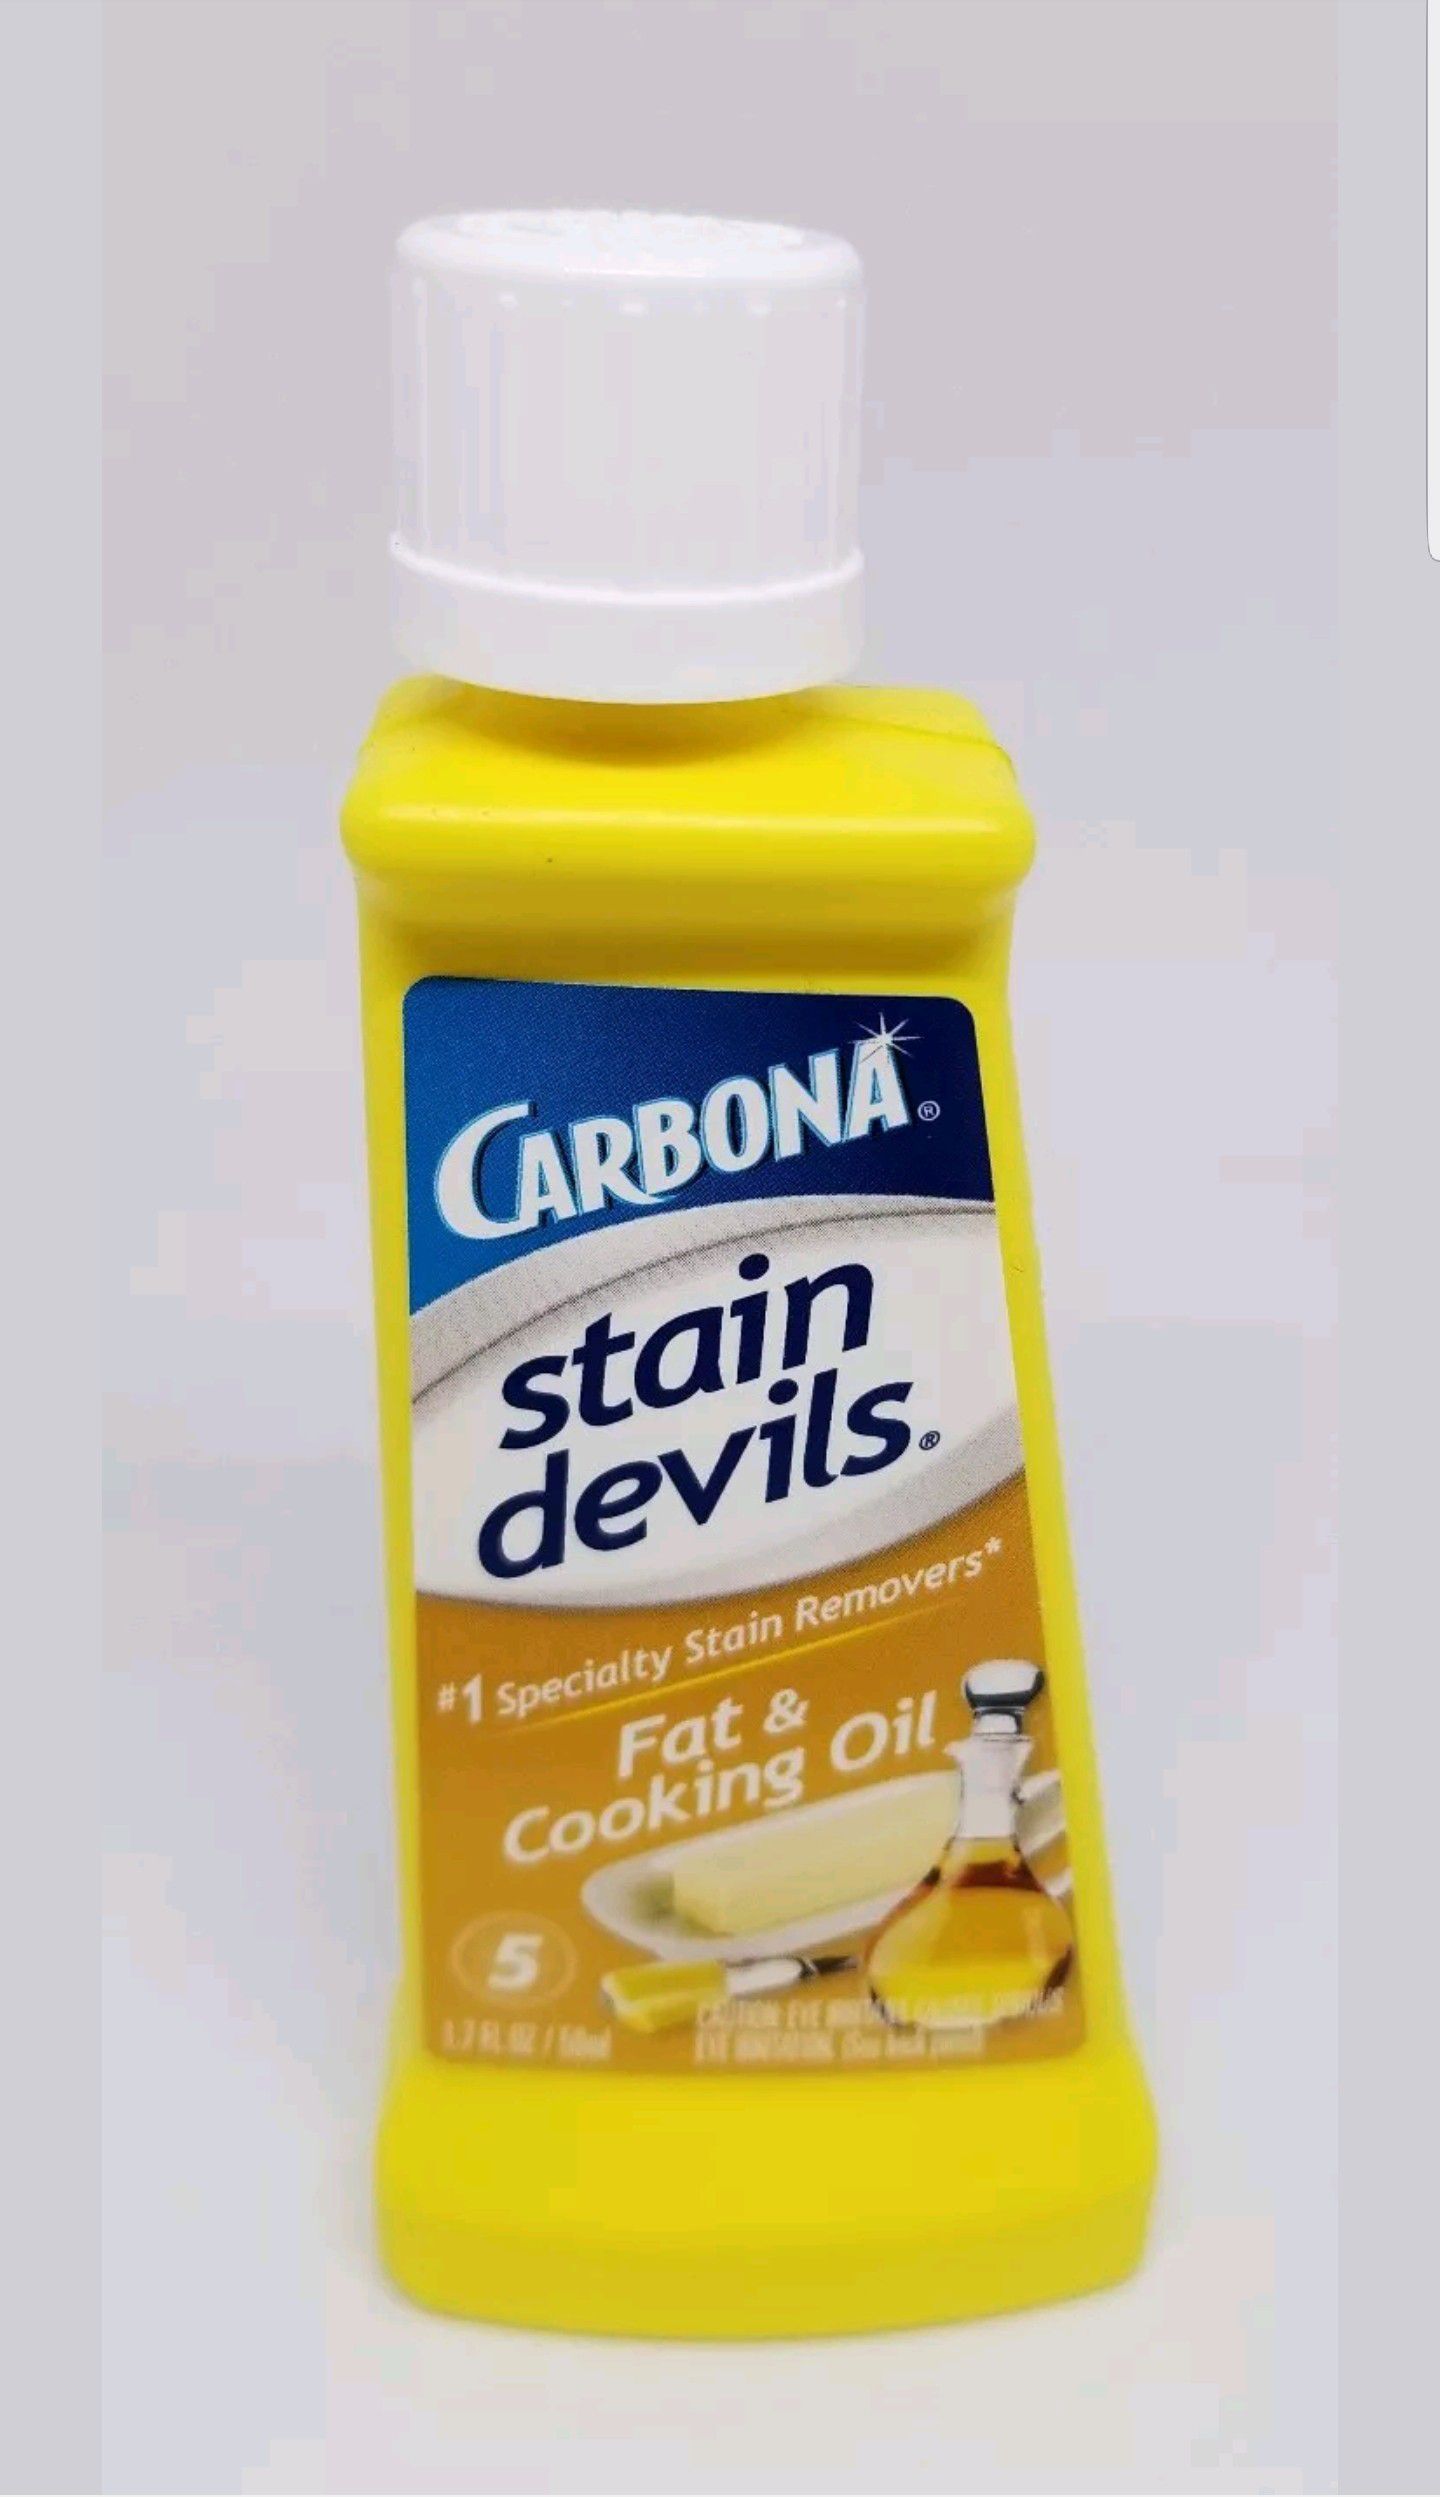 Carbona Stain Devils Fat Cooking Oil 1.7 oz Ounce Specialty Stain Remover 5  NEW for Sale in Land O' Lakes, FL - OfferUp